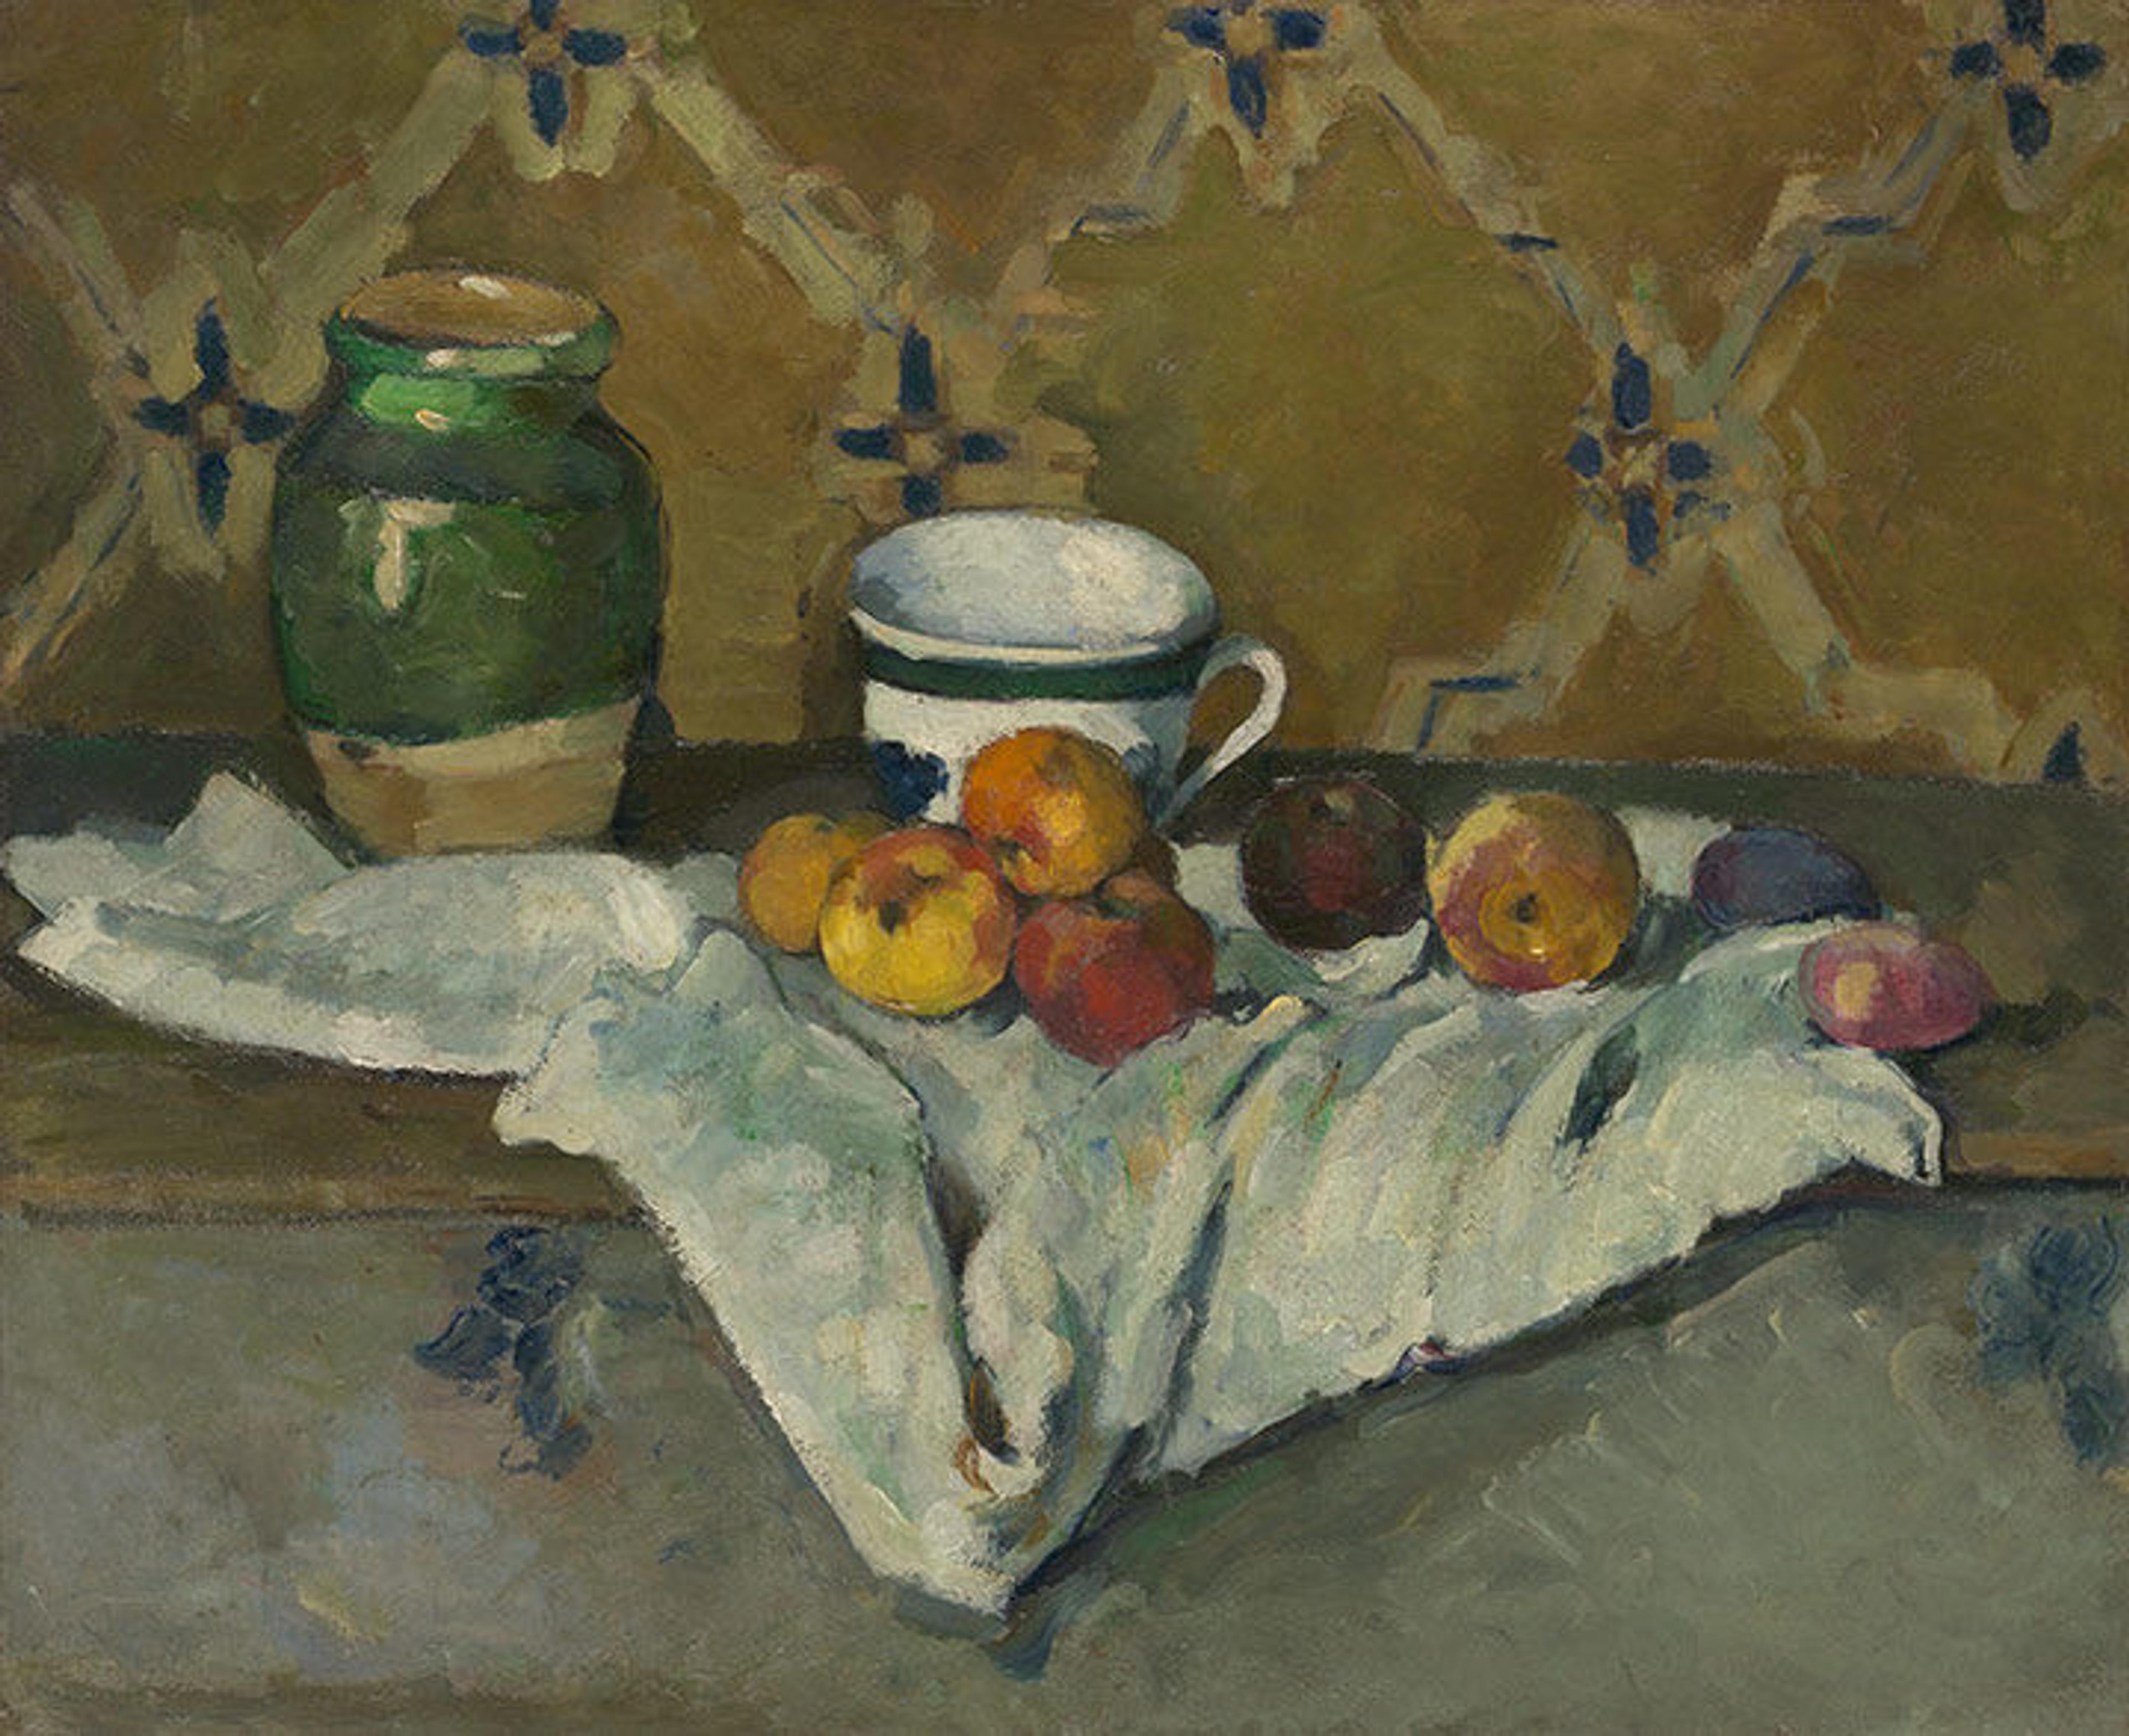 Cezanne's painting of apples, a jar and a mug. 